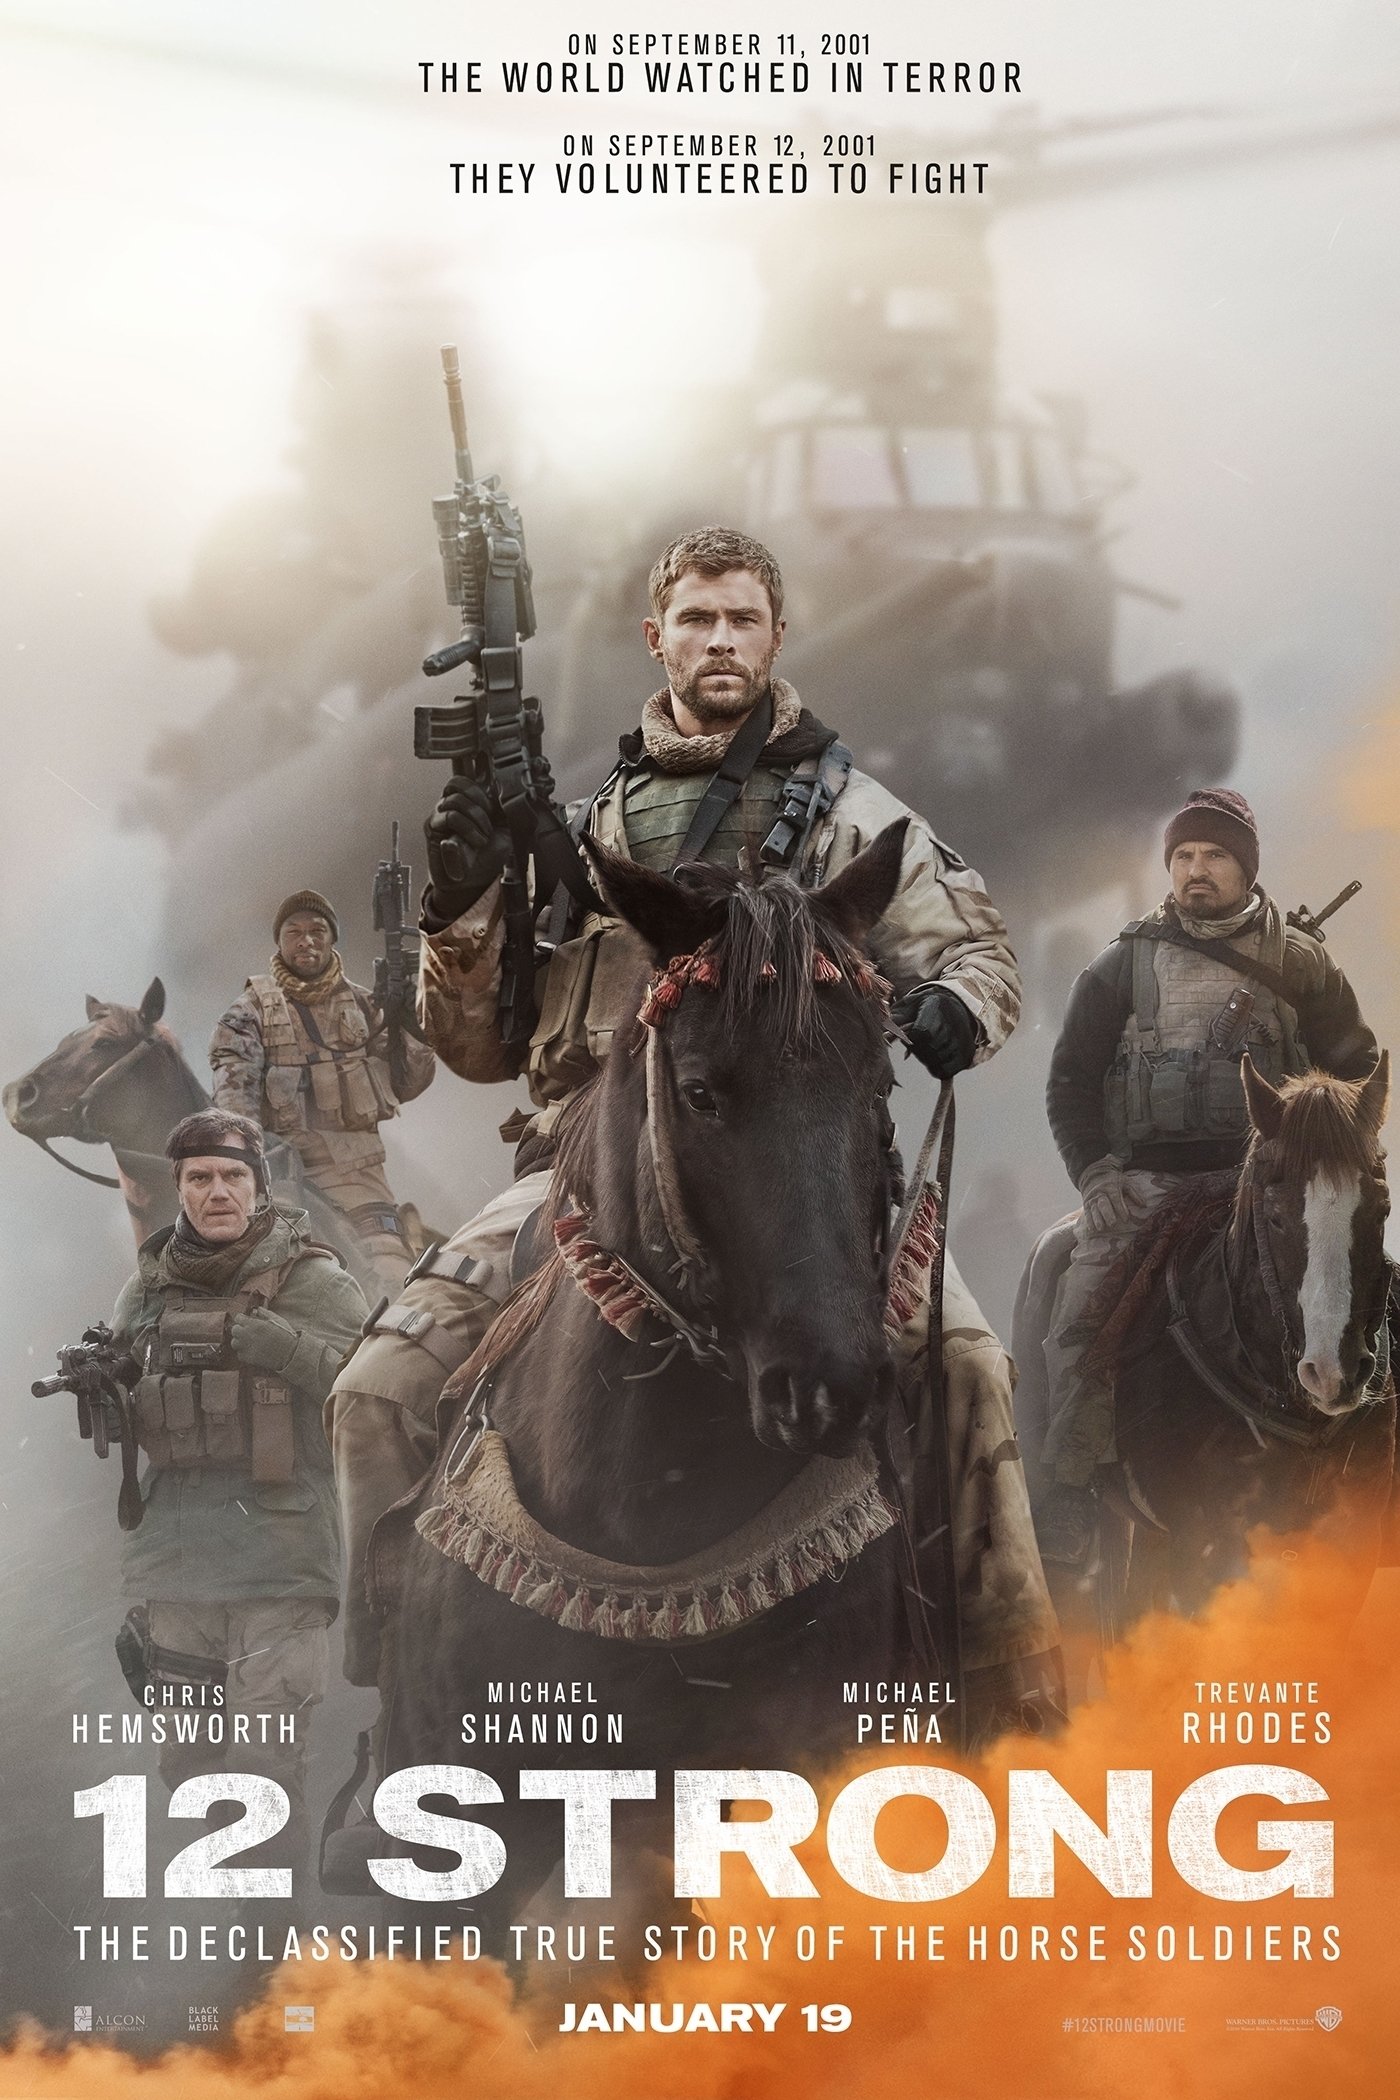 12 Strong - Desktop Wallpapers, Phone Wallpaper, PFP, Gifs, and More!